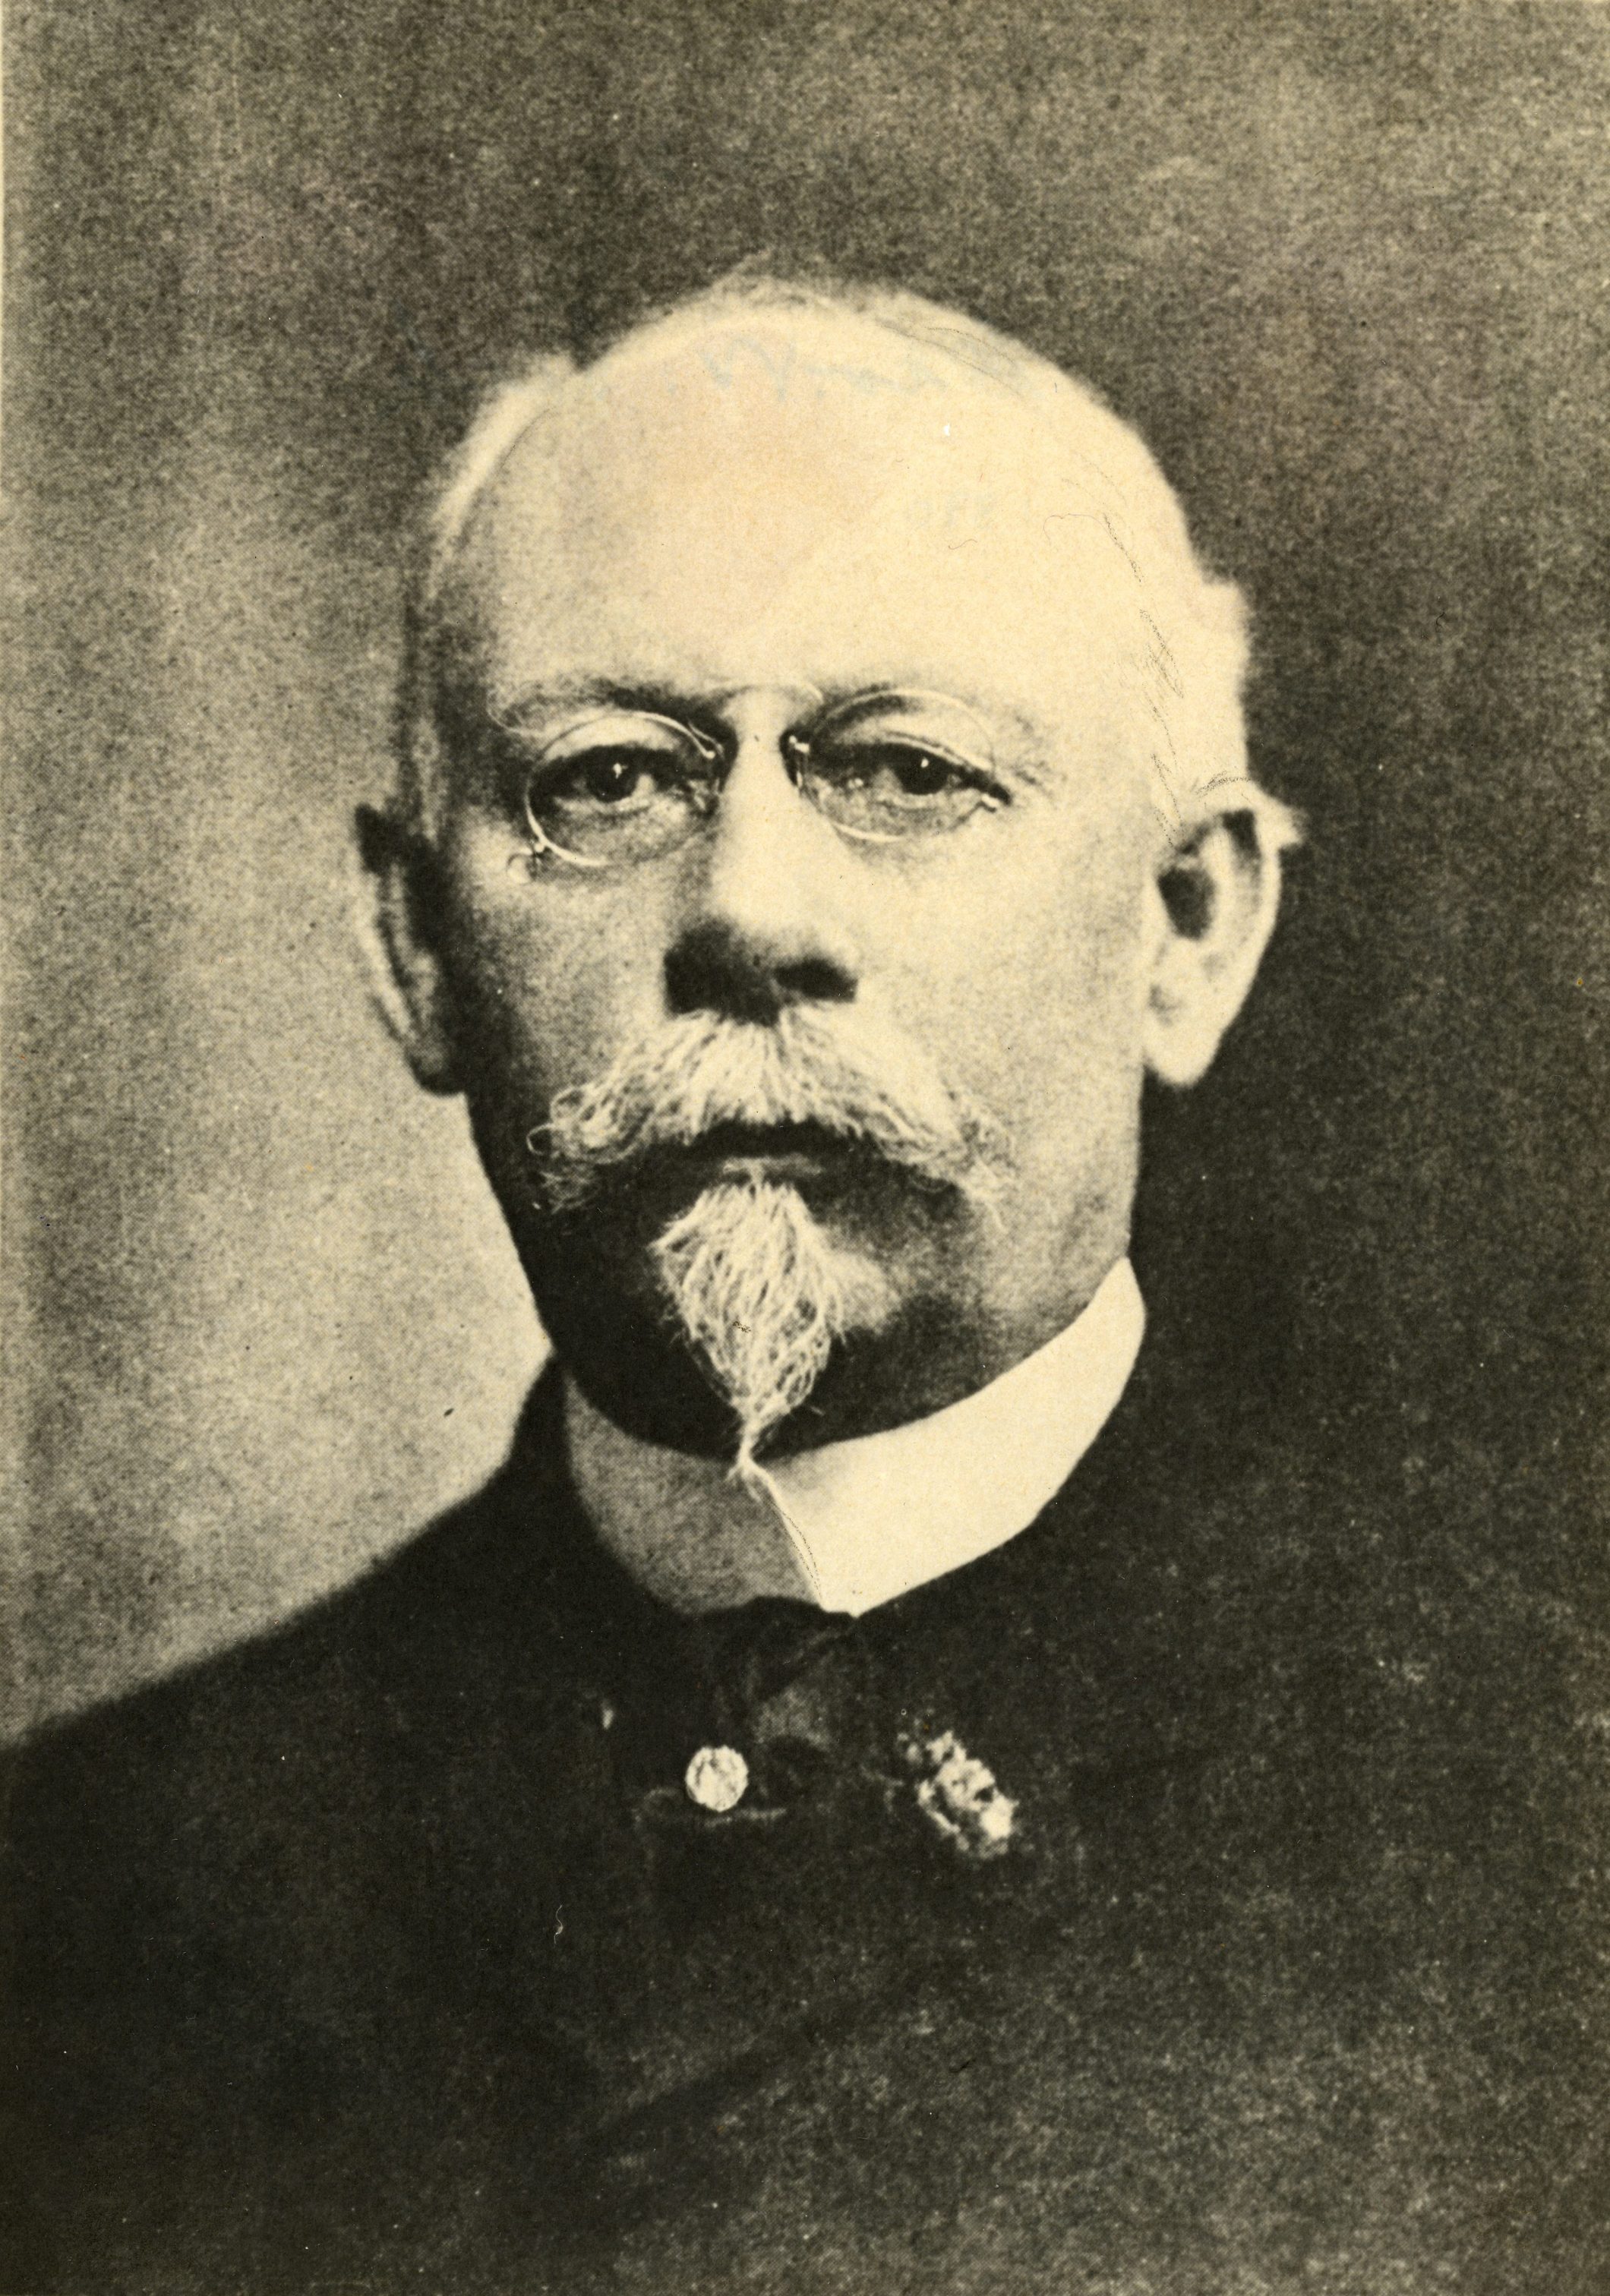 Portrait of George W. Peck. Peck served as Milwaukee's mayor in 1890 before being elected as Wisconsin's governor, a position he held for four years. 